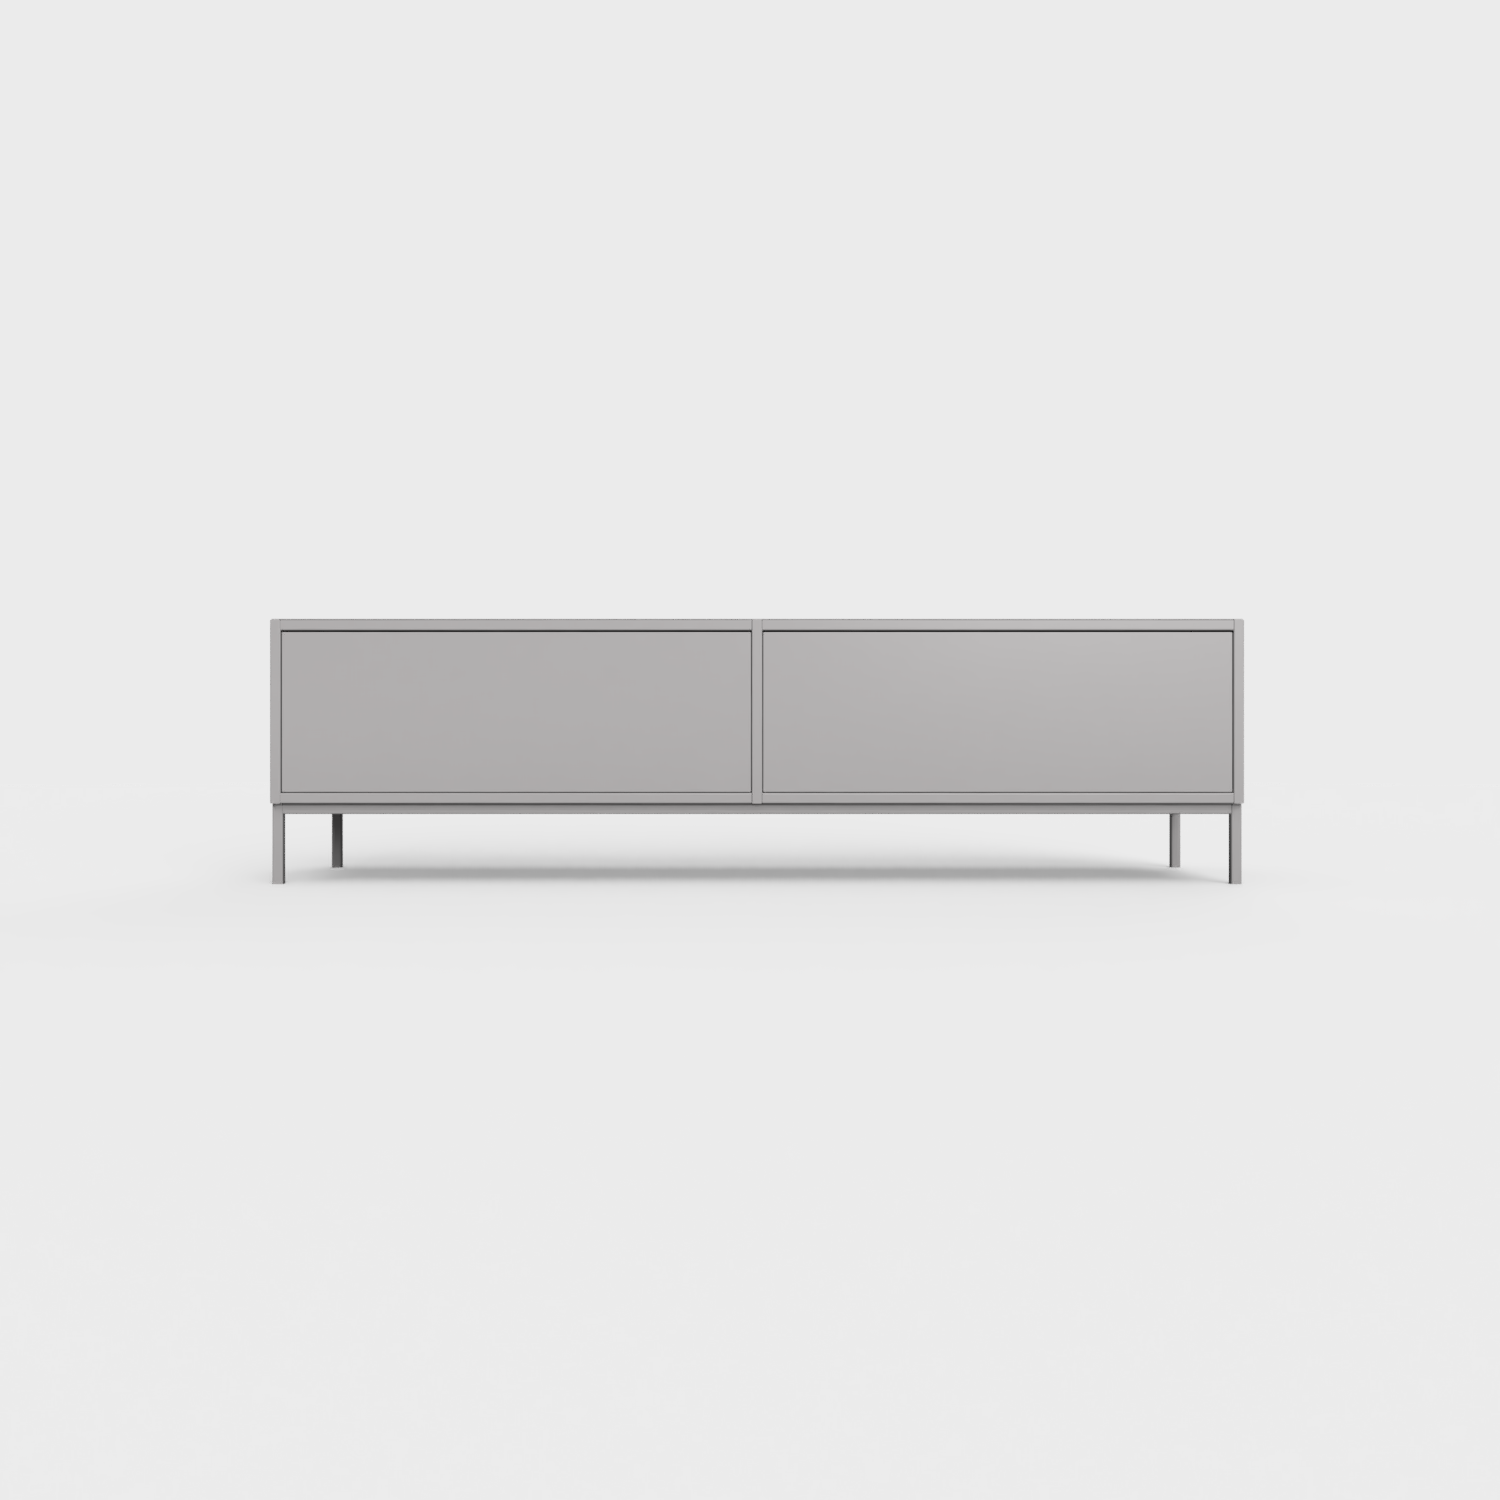 Prunus 01 Lowboard in Ashen_Gray color, powder-coated steel, elegant and modern piece of furniture for your living room